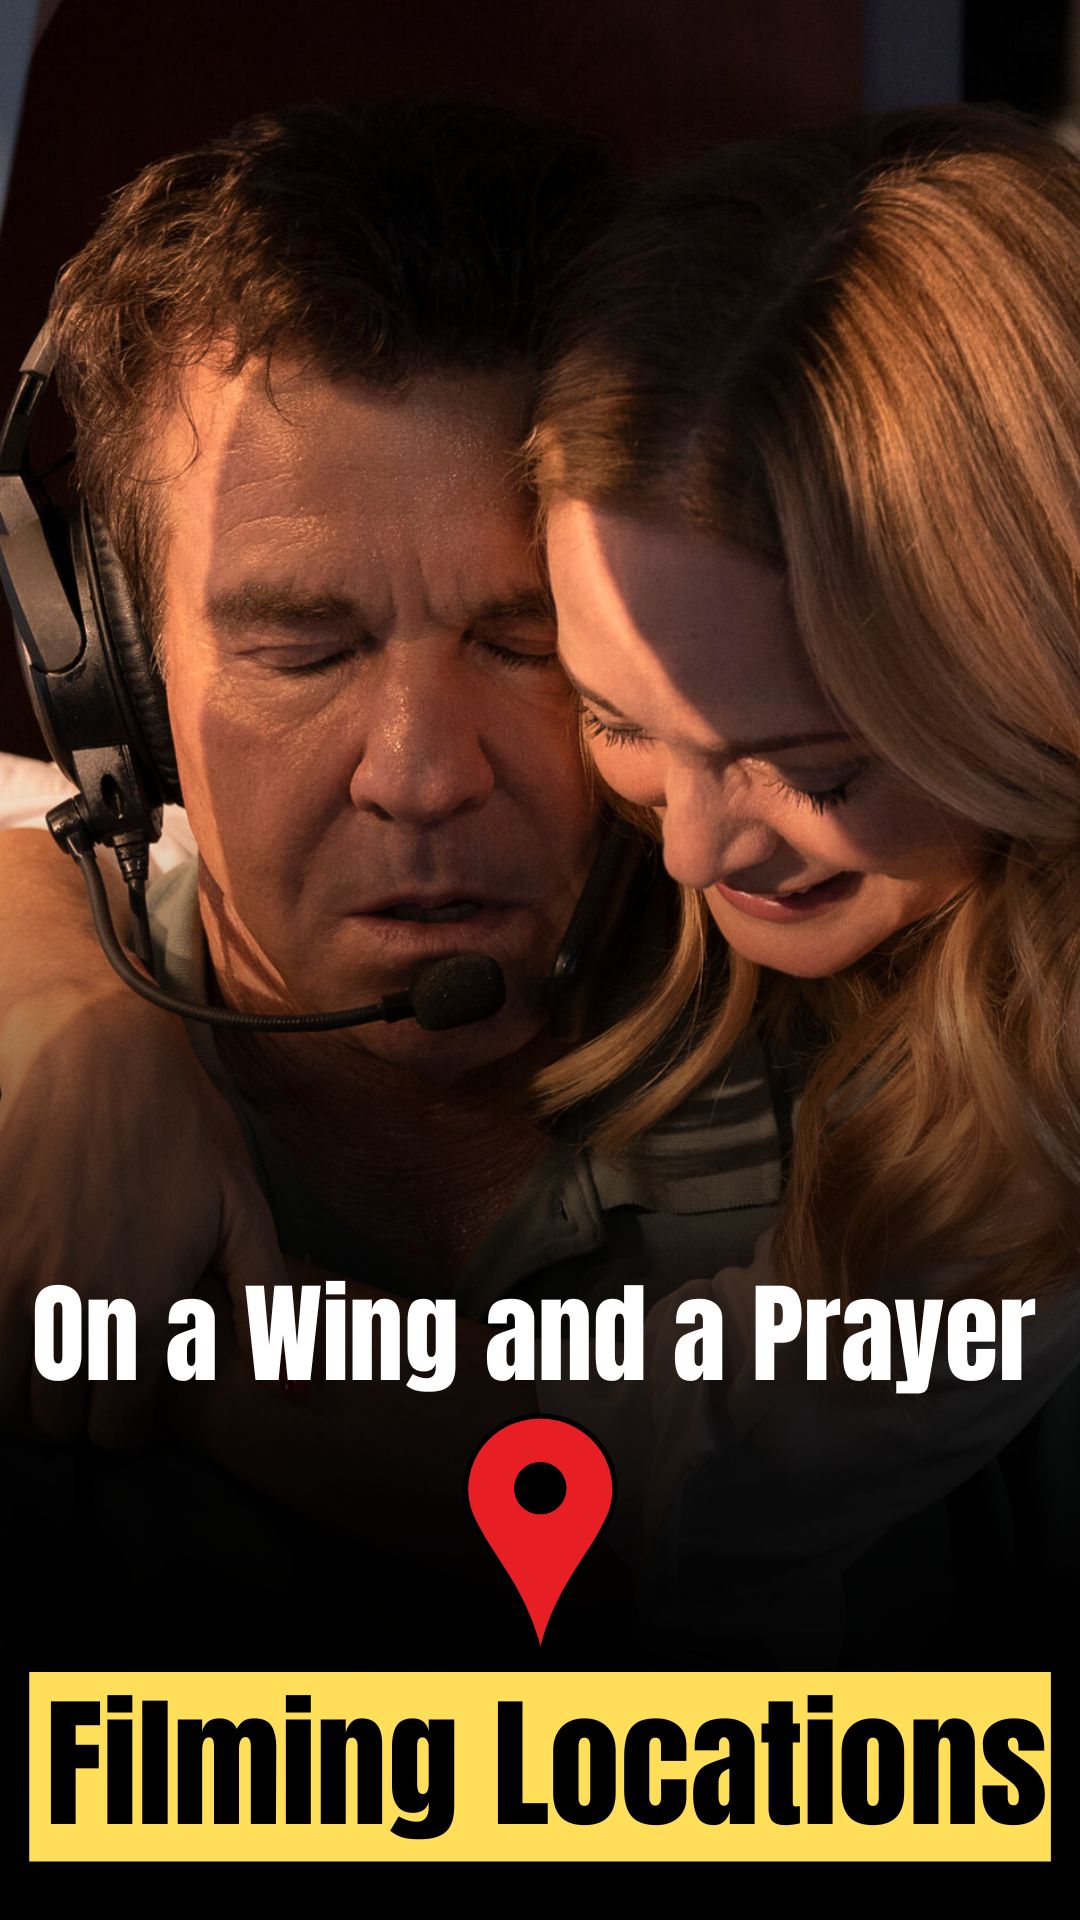 On a Wing and a Prayer Filming Locations